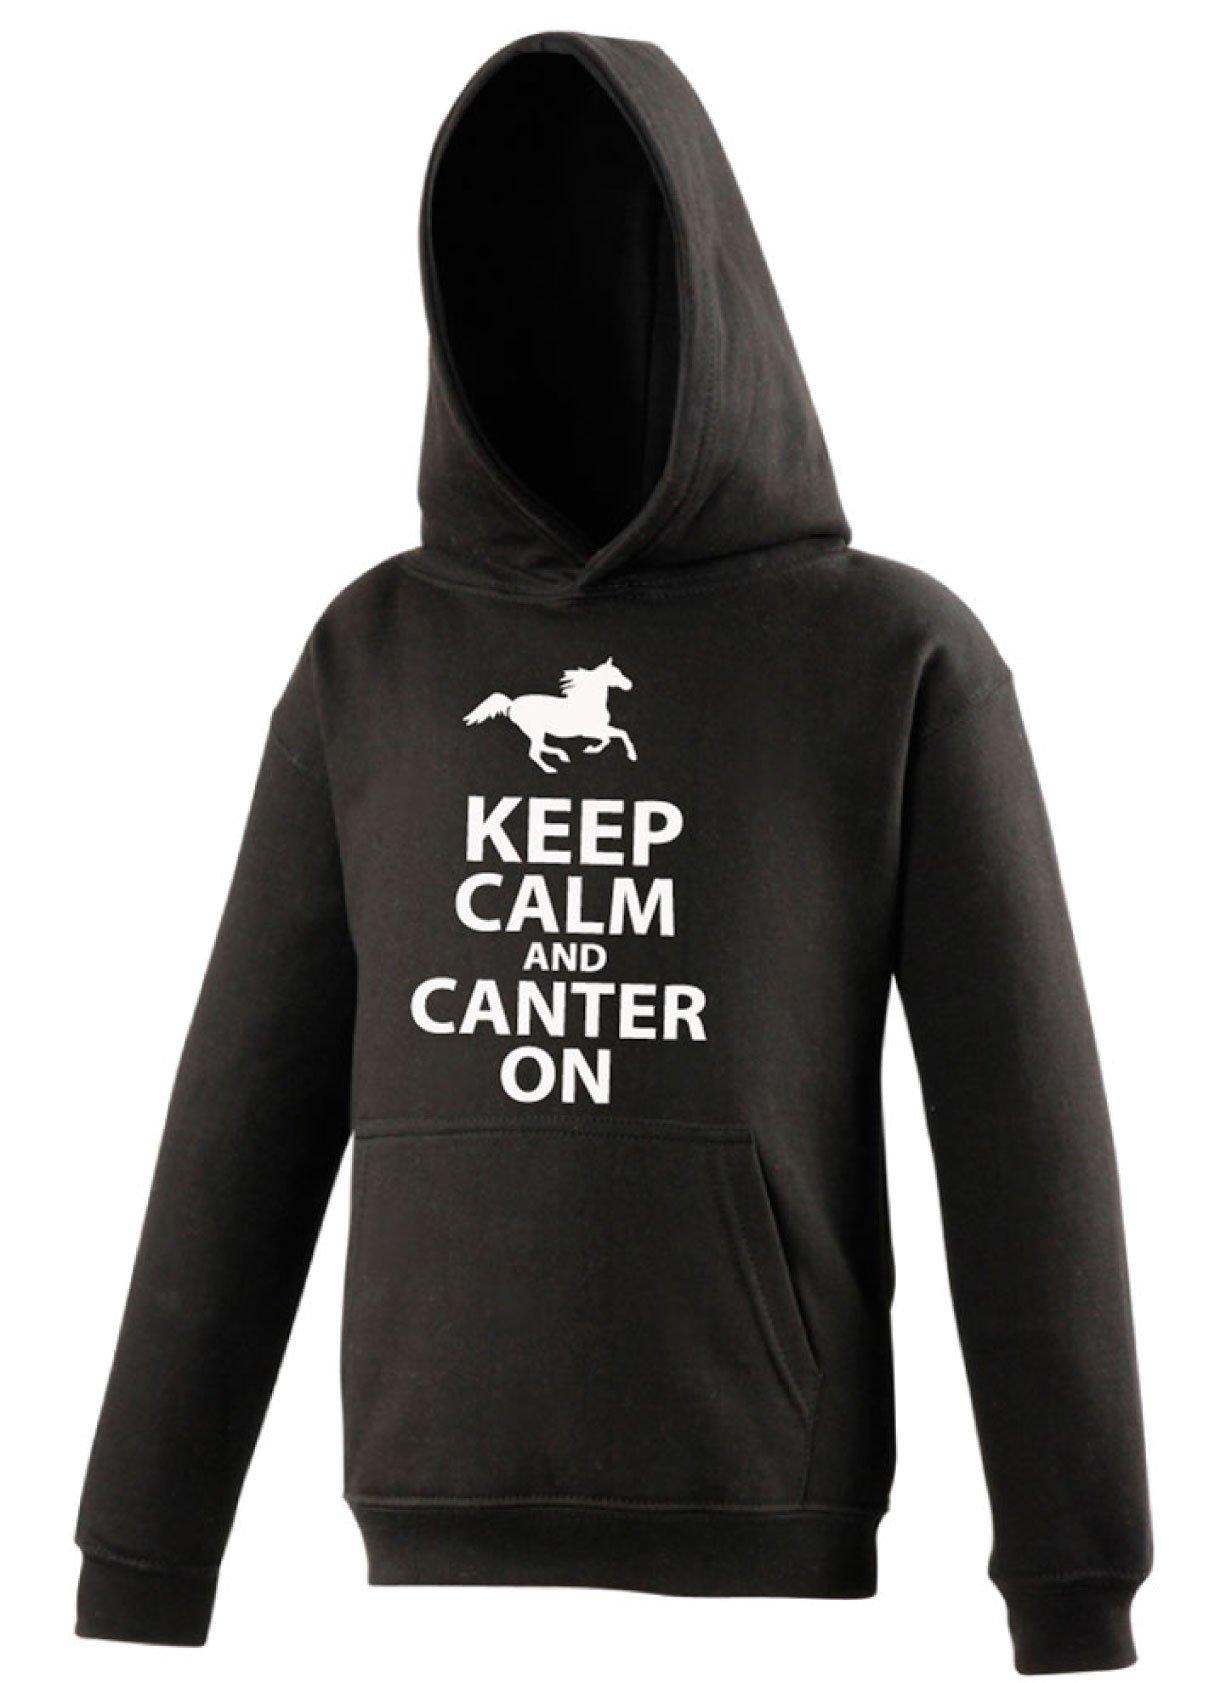 Kids Black Keep Calm and Canter On Hoodie